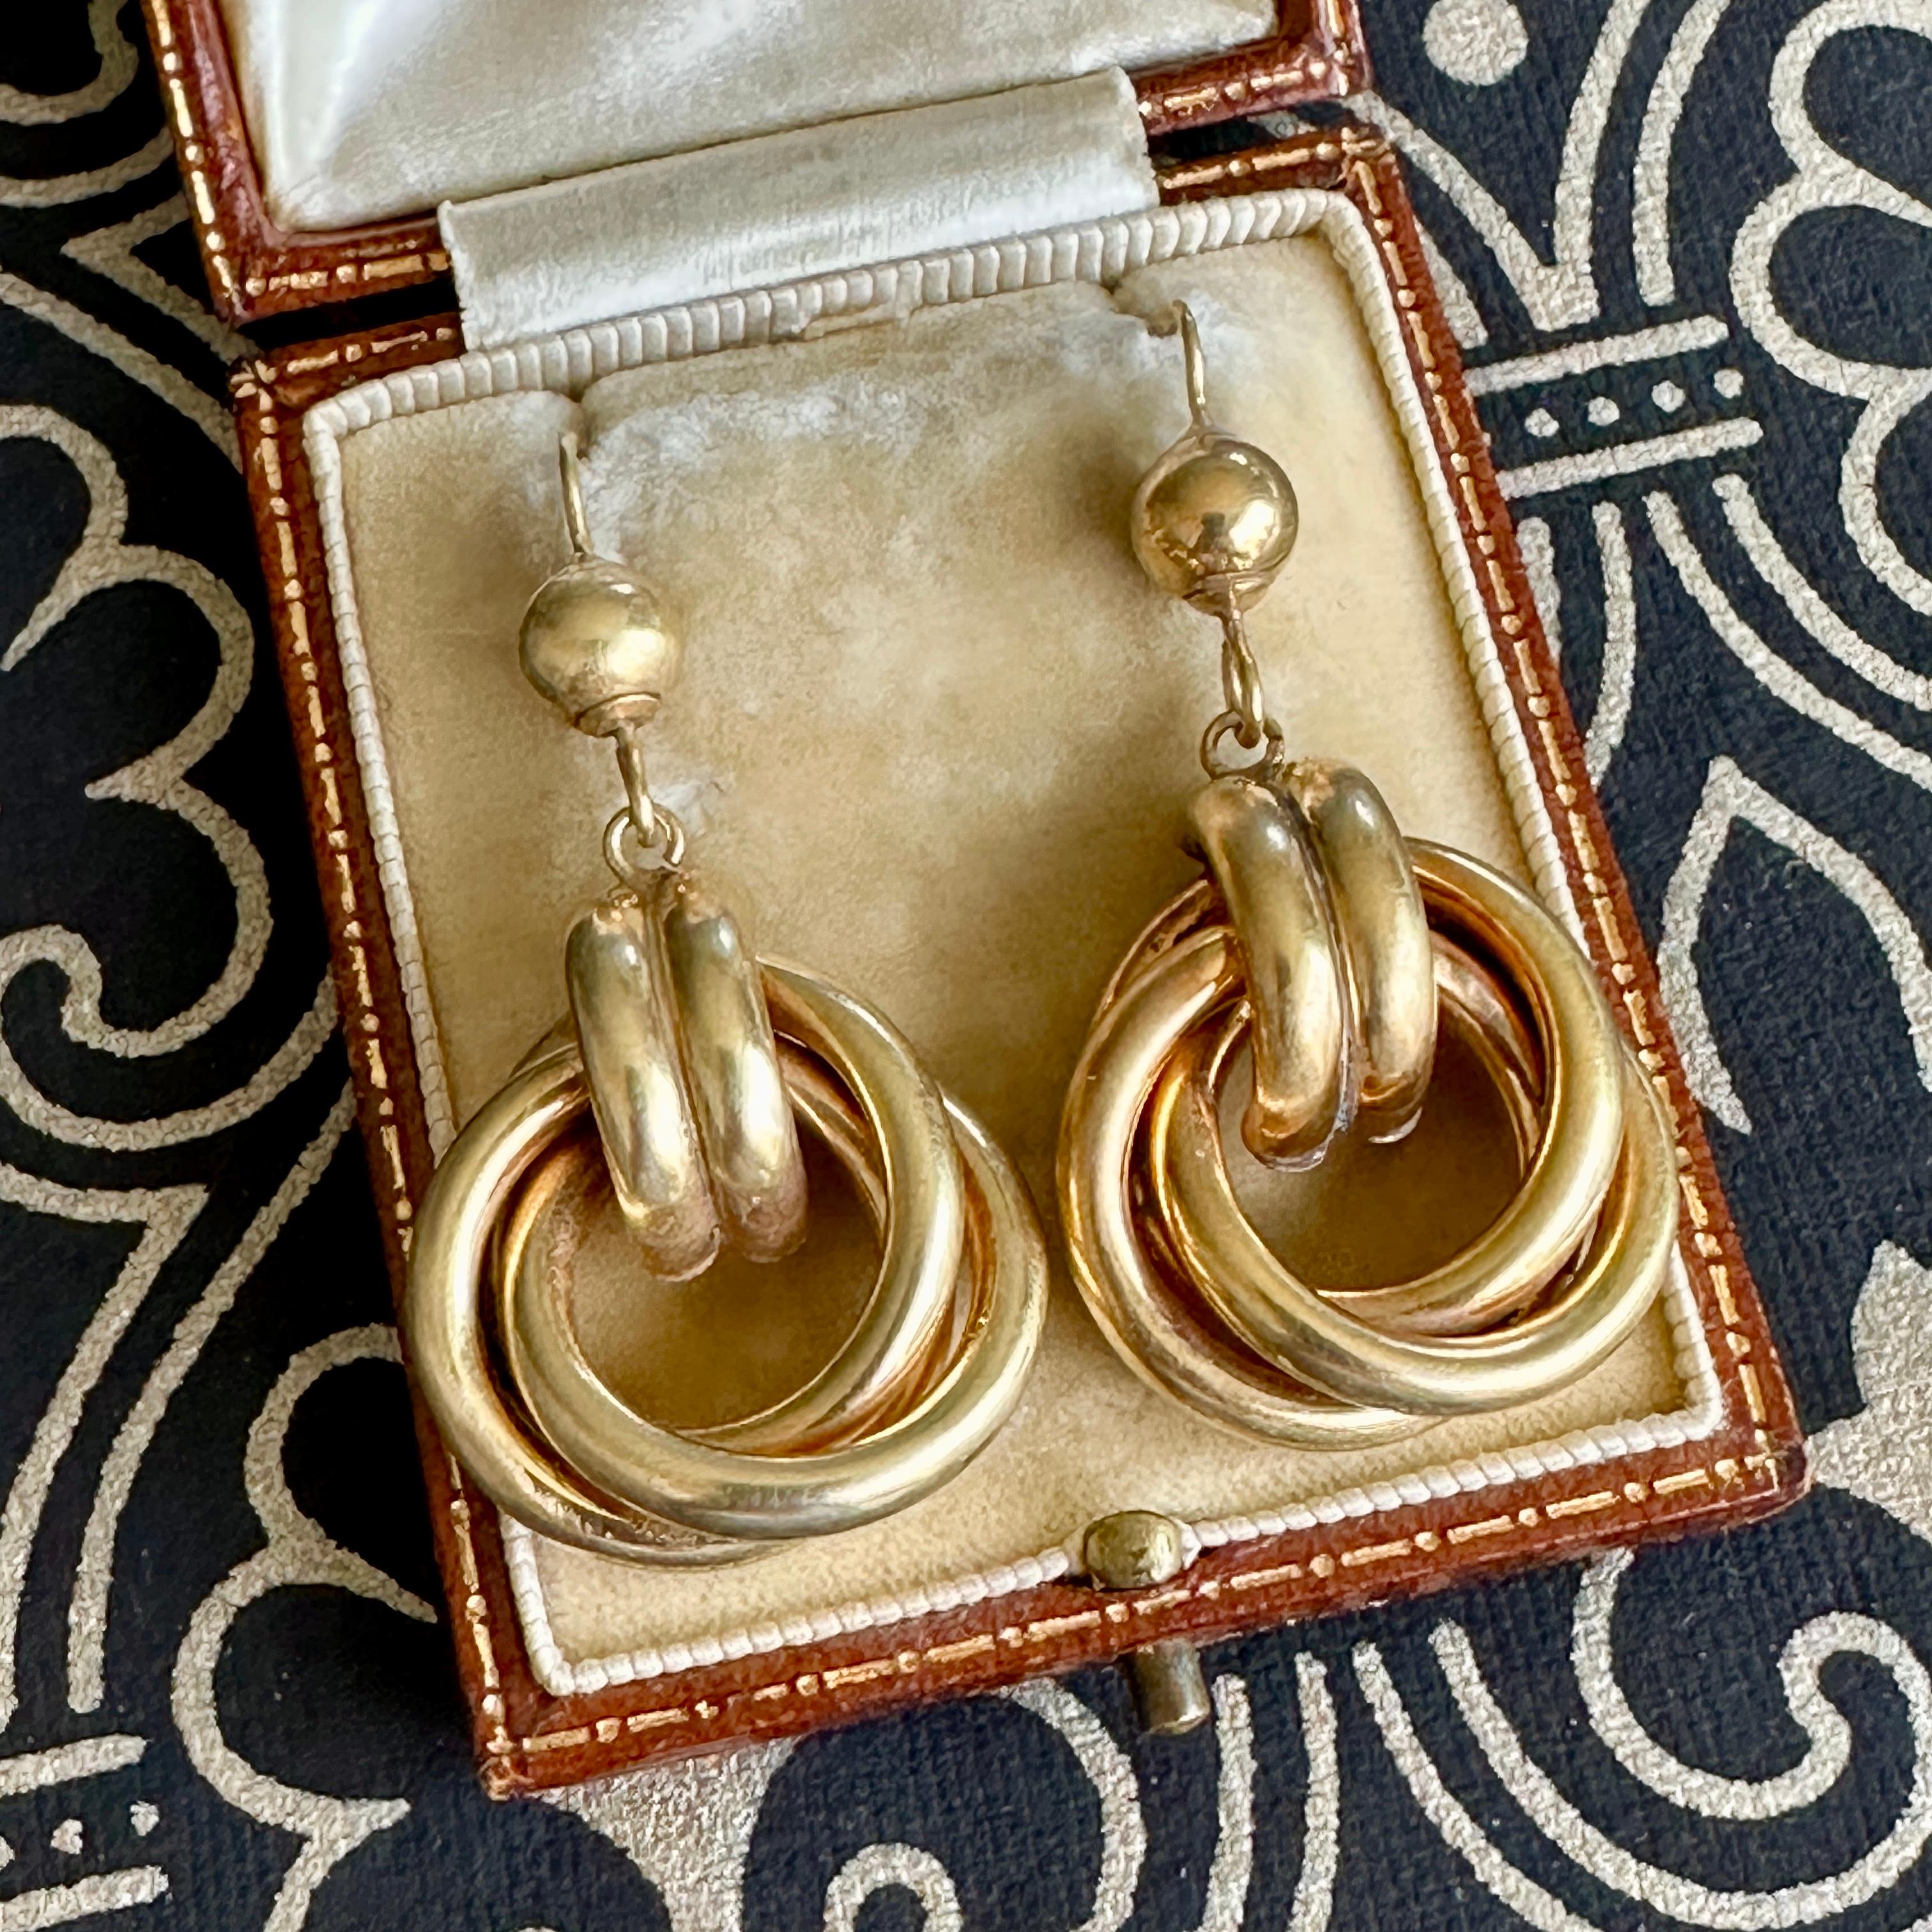 Details:
Vintage timeless classic 9K yellow gold double hoop earrings. Sweet classic twisted knot earrings, would look great for work, or an evening out! Perfect pair to wear everyday! No hallmarks are present but all segments have been tested to